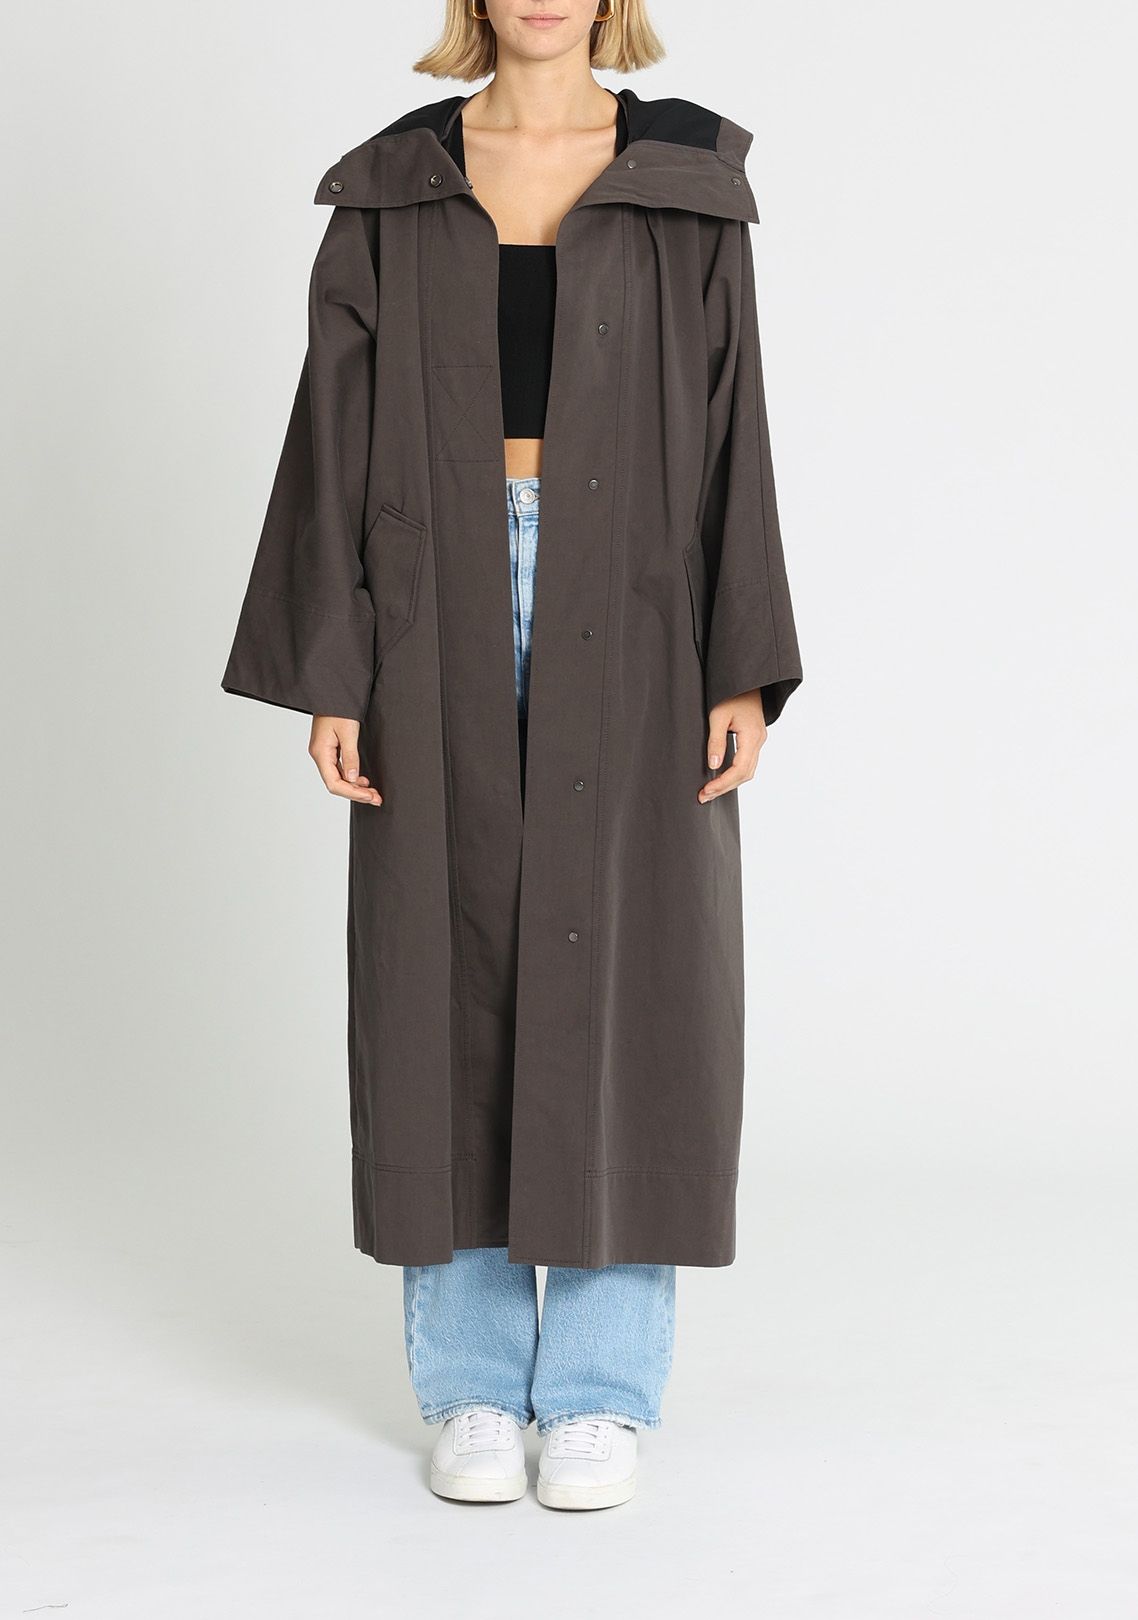 Hire Dunne Hooded Coat in Coal | C&M Camilla and Marc | GlamCorner